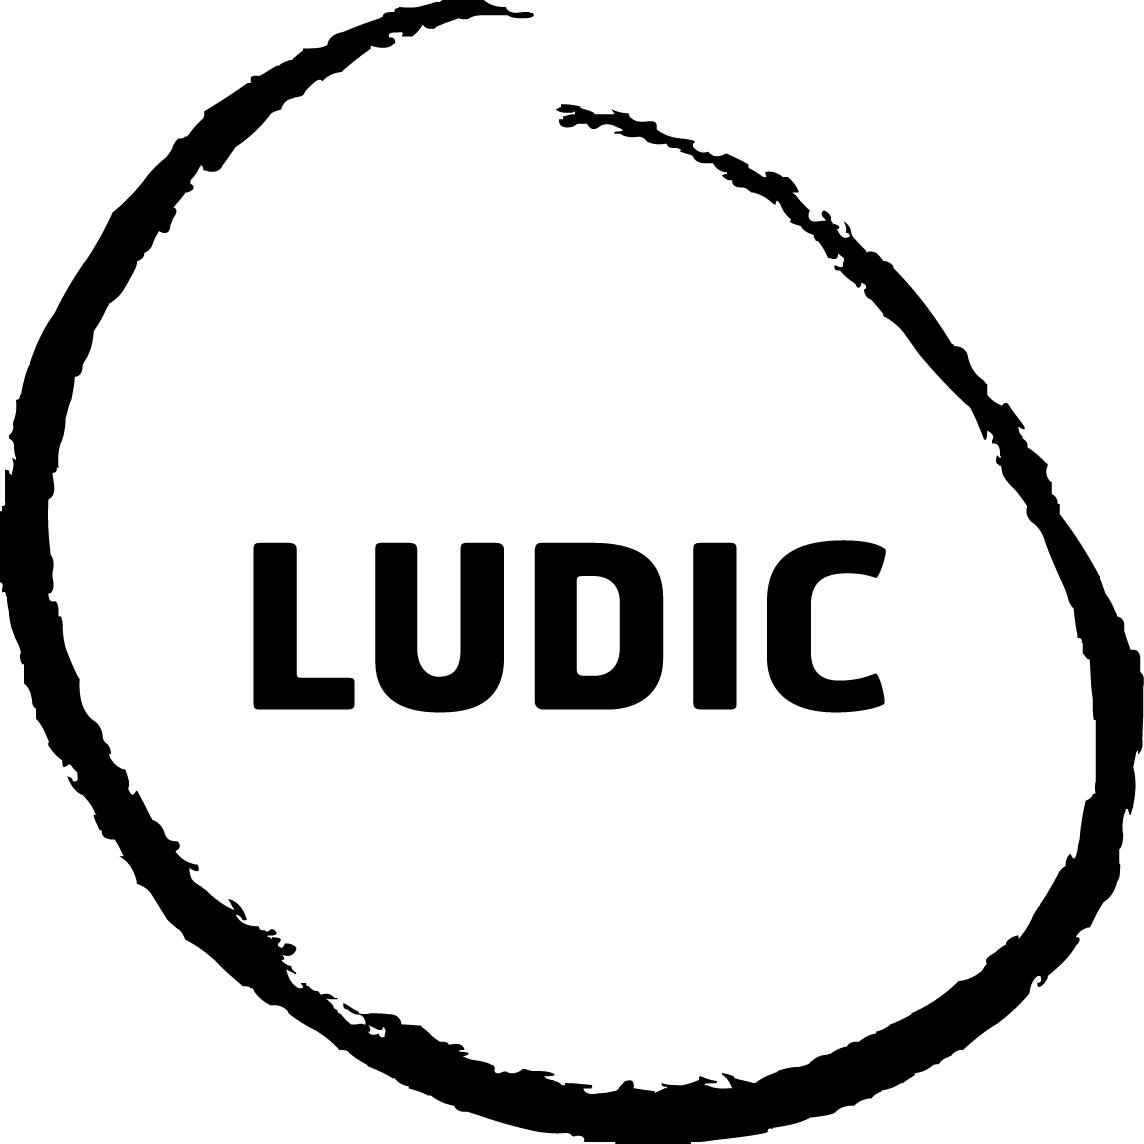 LUDIC_LOGO_BLACK_new Services: Strategic Action Research - Ludic Consulting